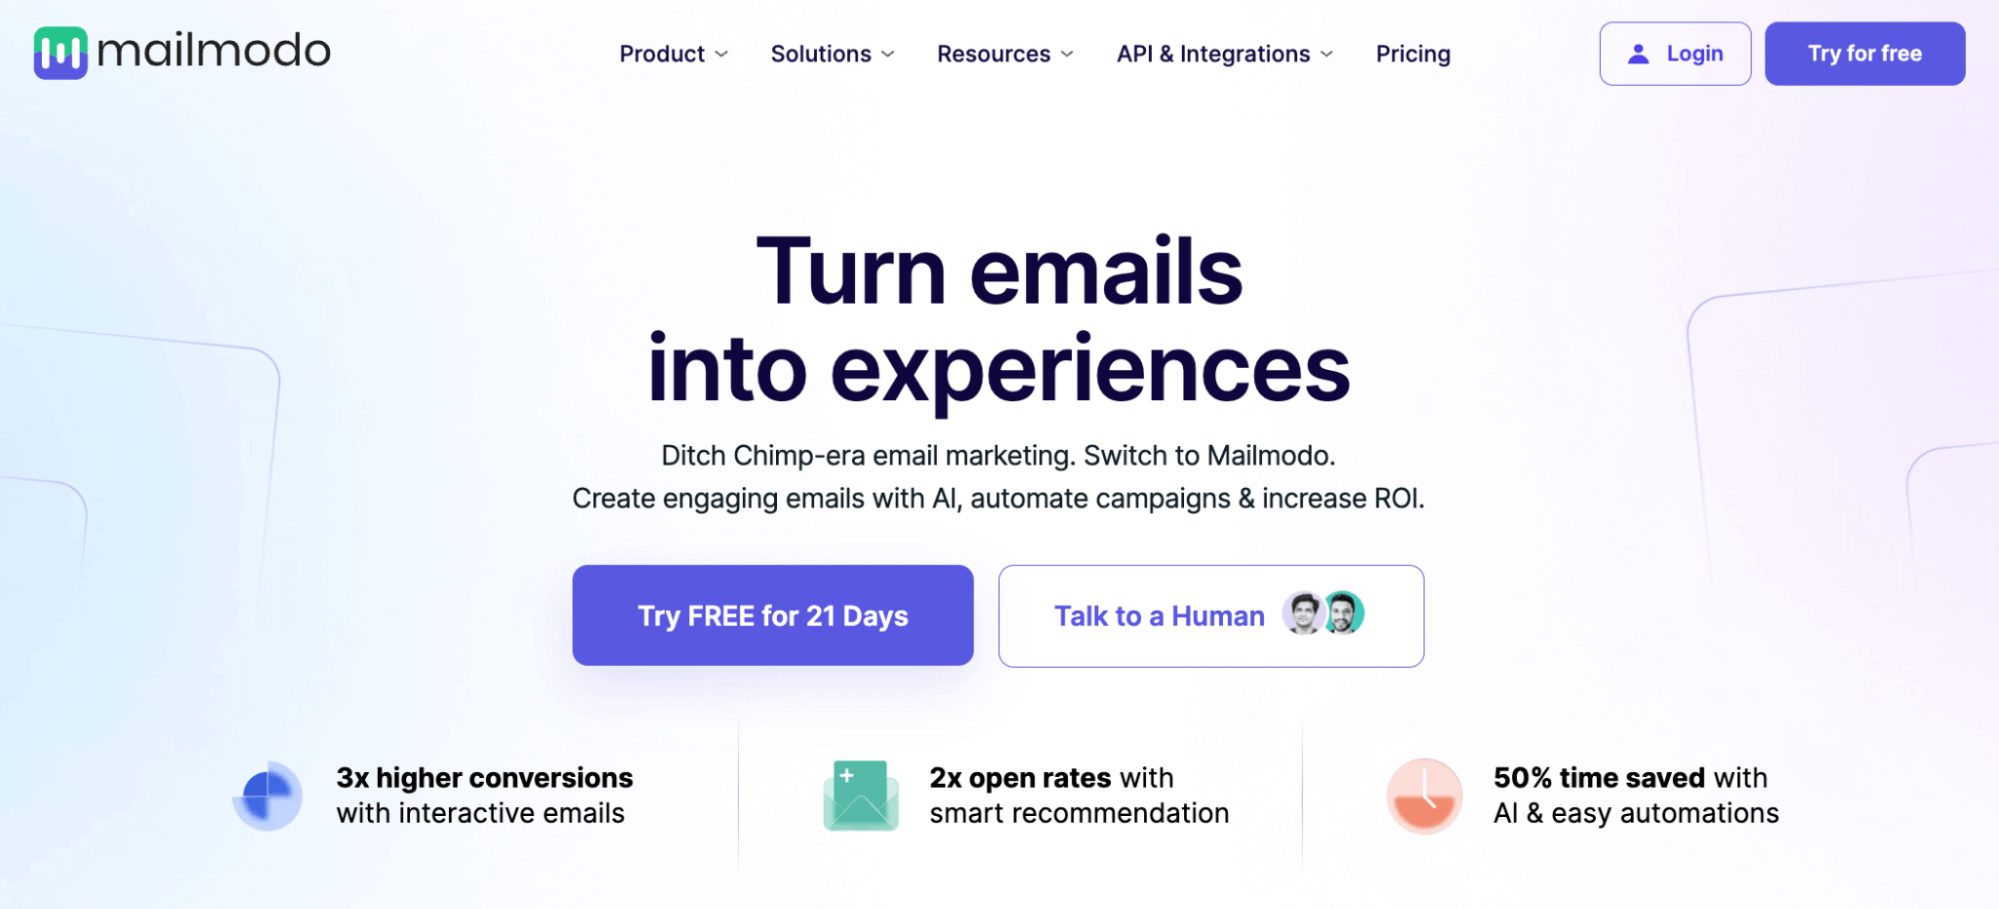 Turn emails into experiences